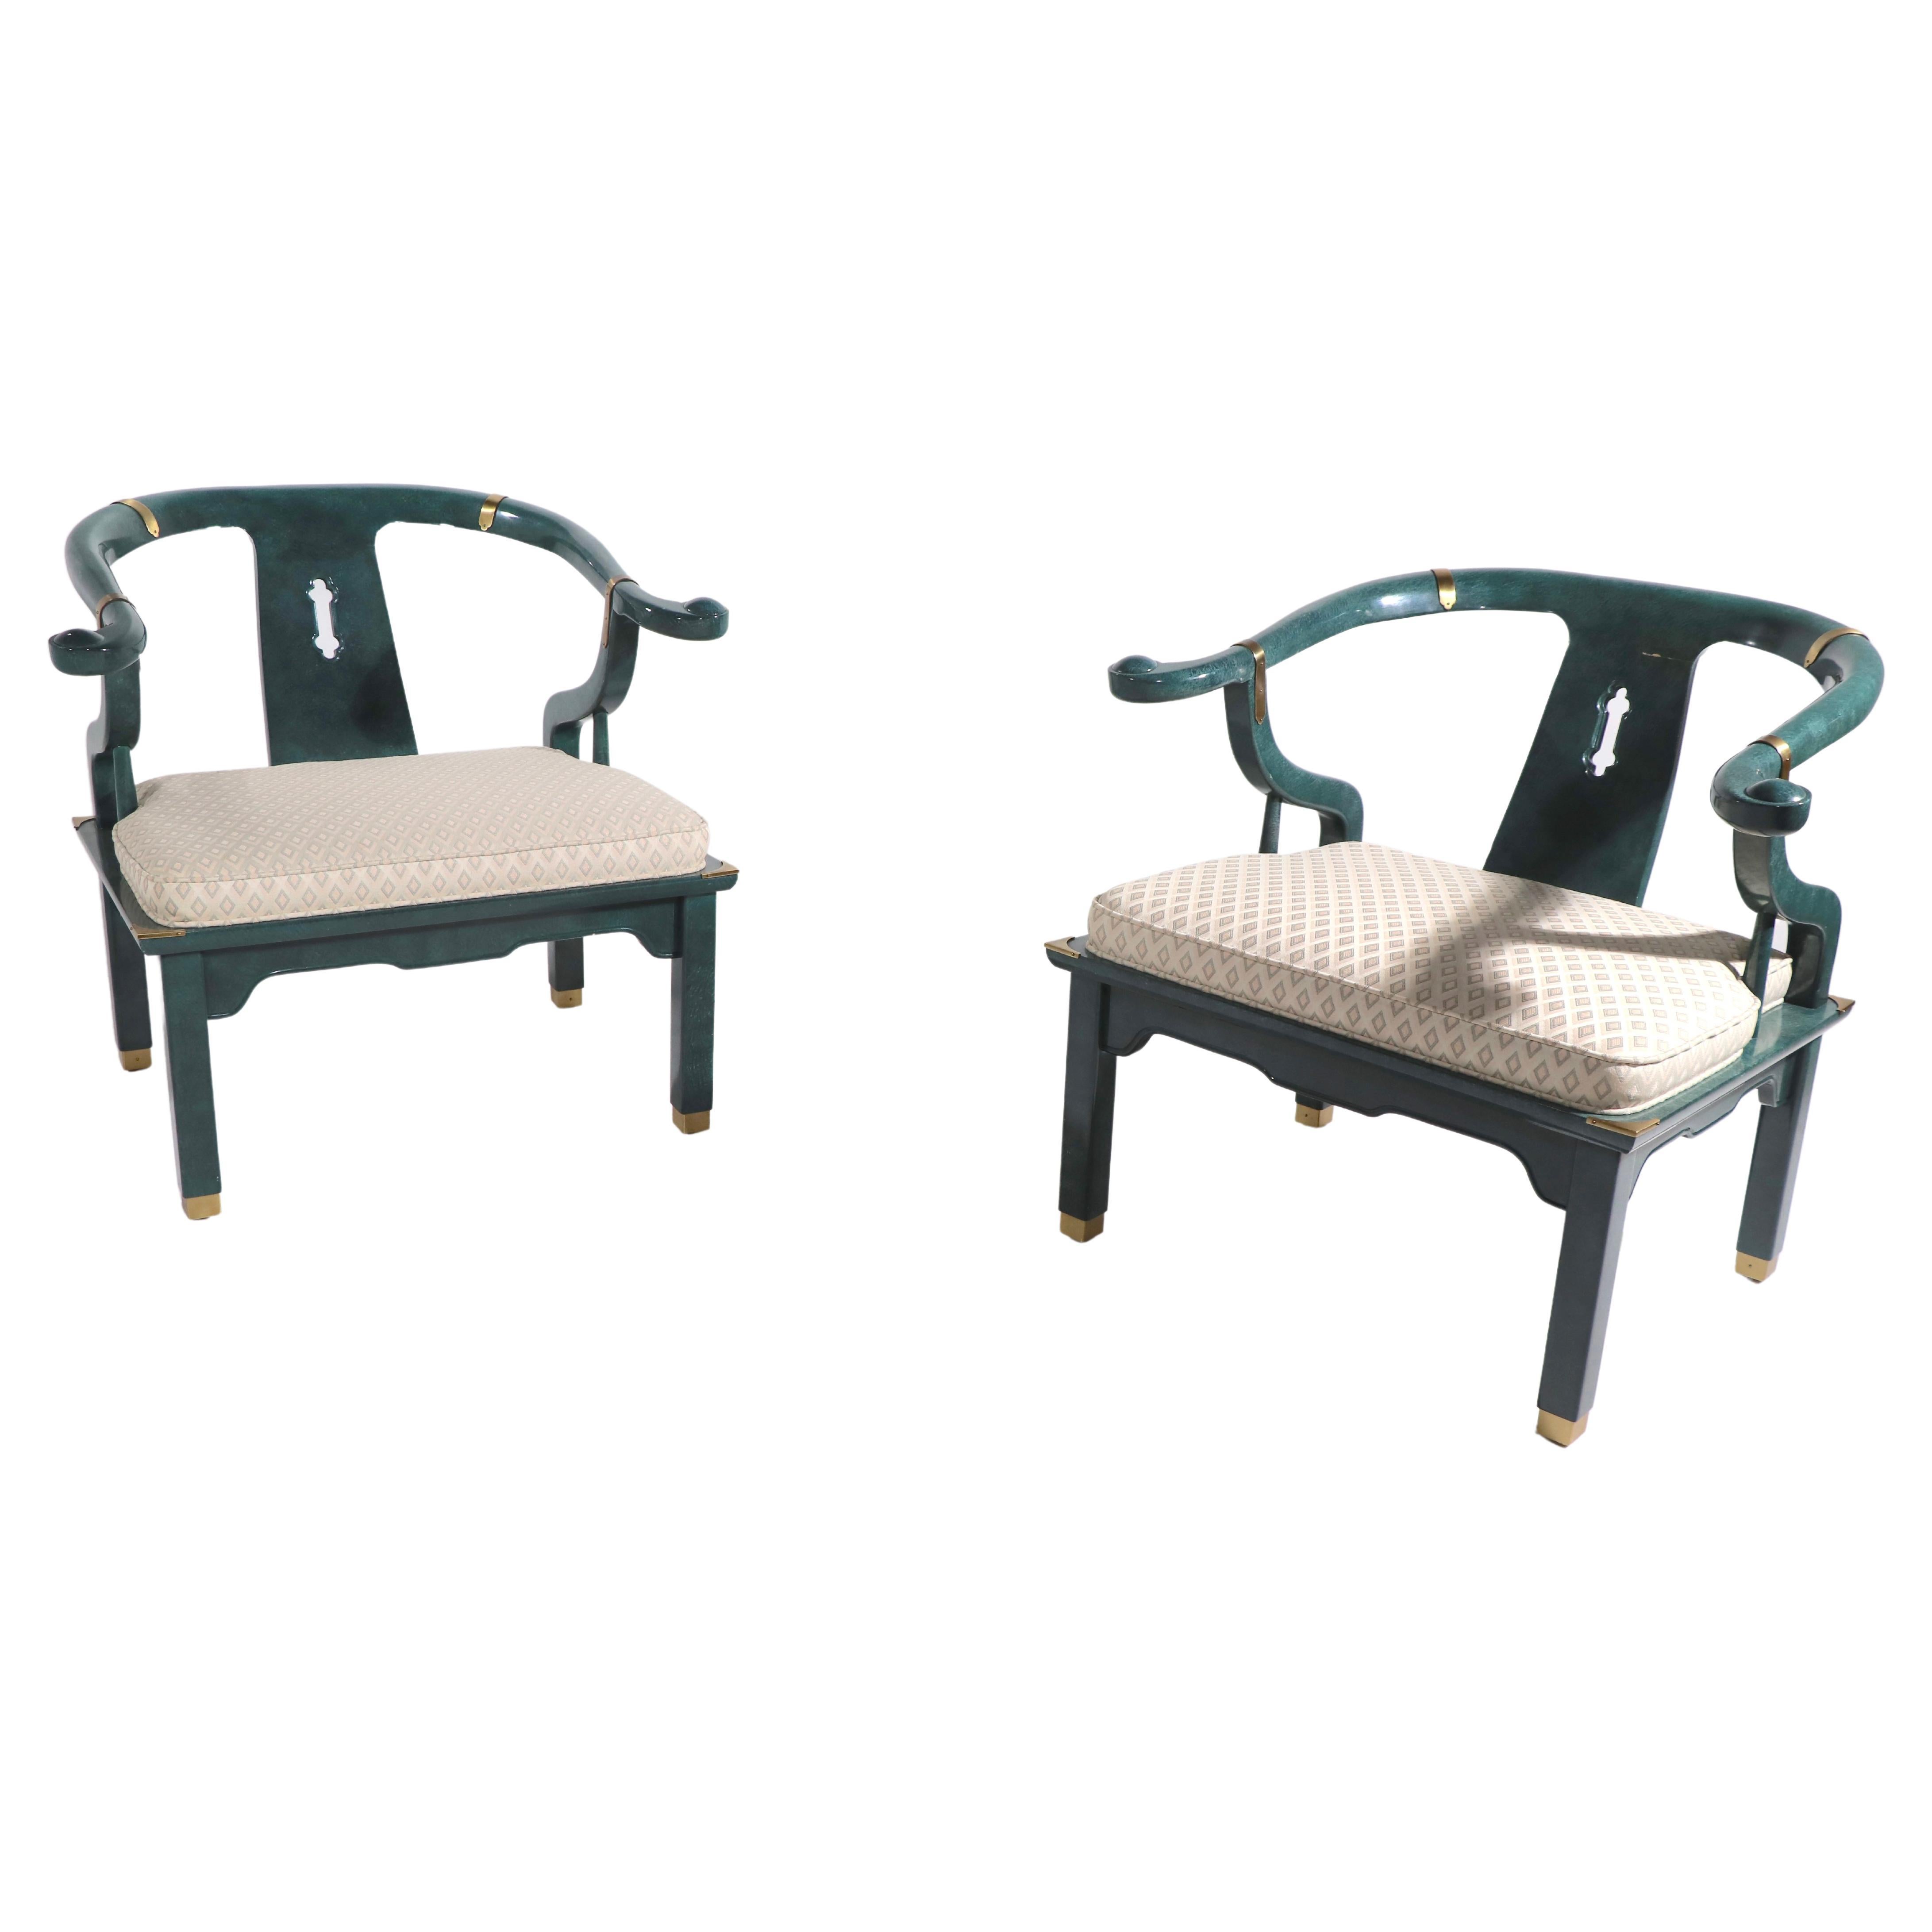 Pr. Chinese Modern Ox Bow Chairs in Faux Jade Finish by Century Furniture